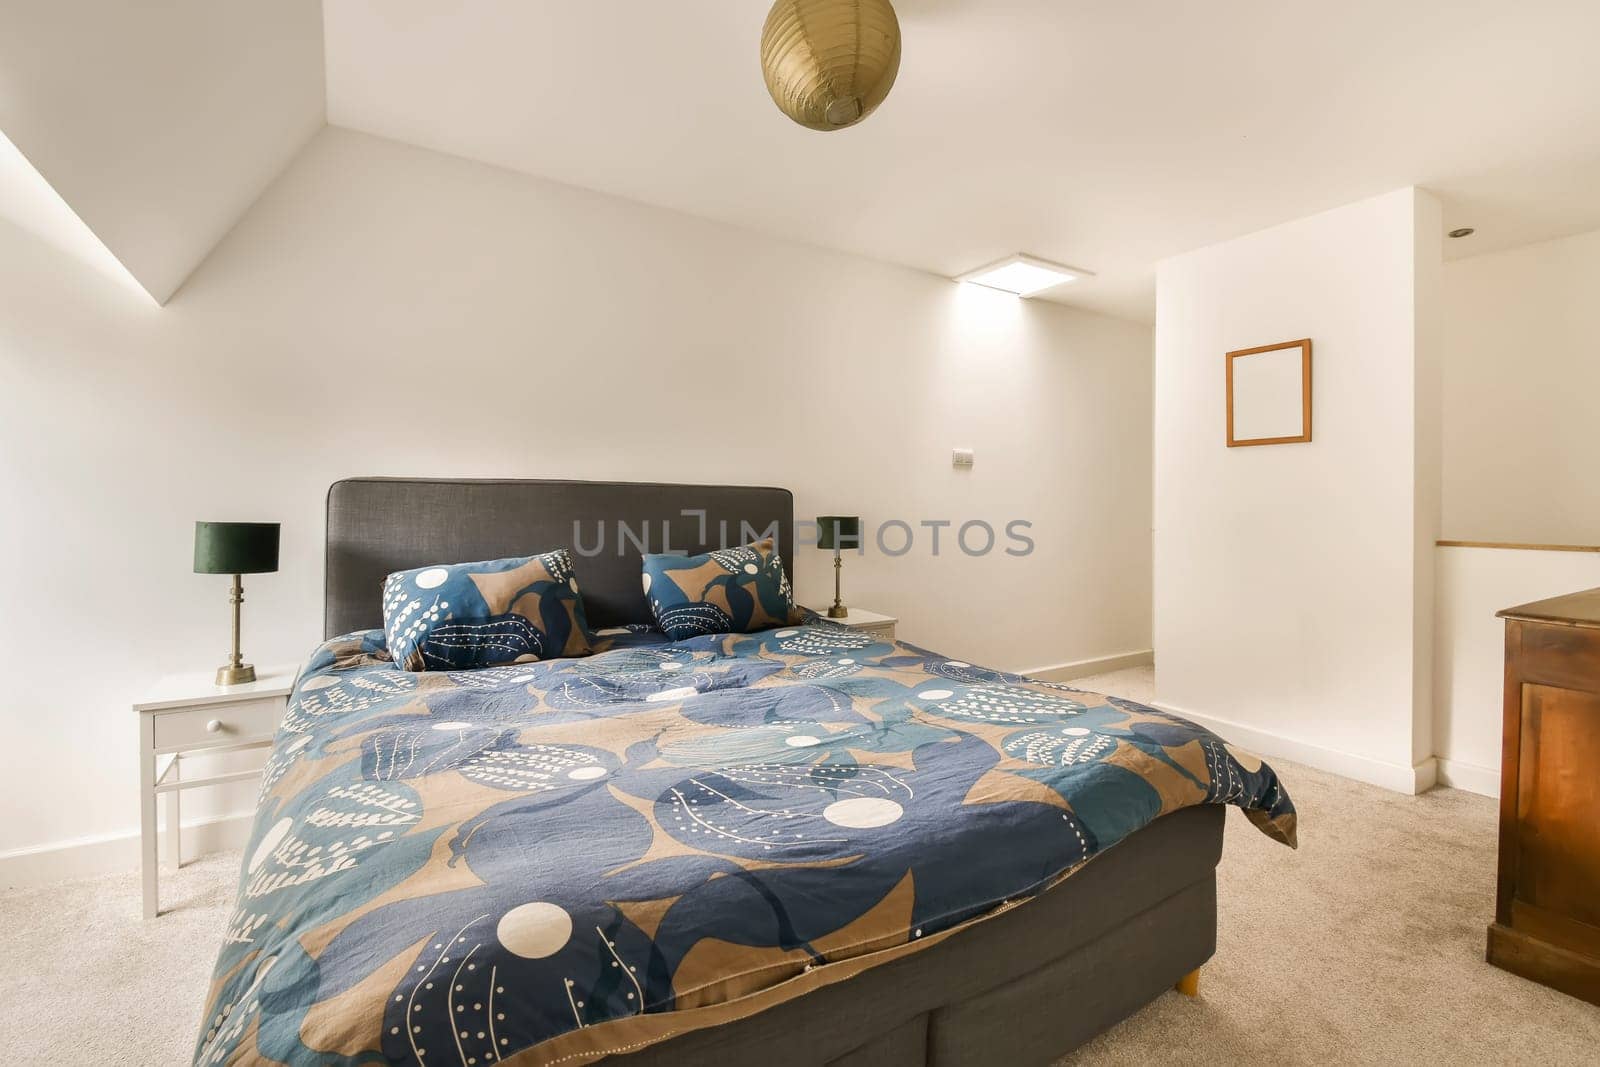 a bedroom with a bed, dresser and mirror on the wall above it is an image of a blue floral comforter